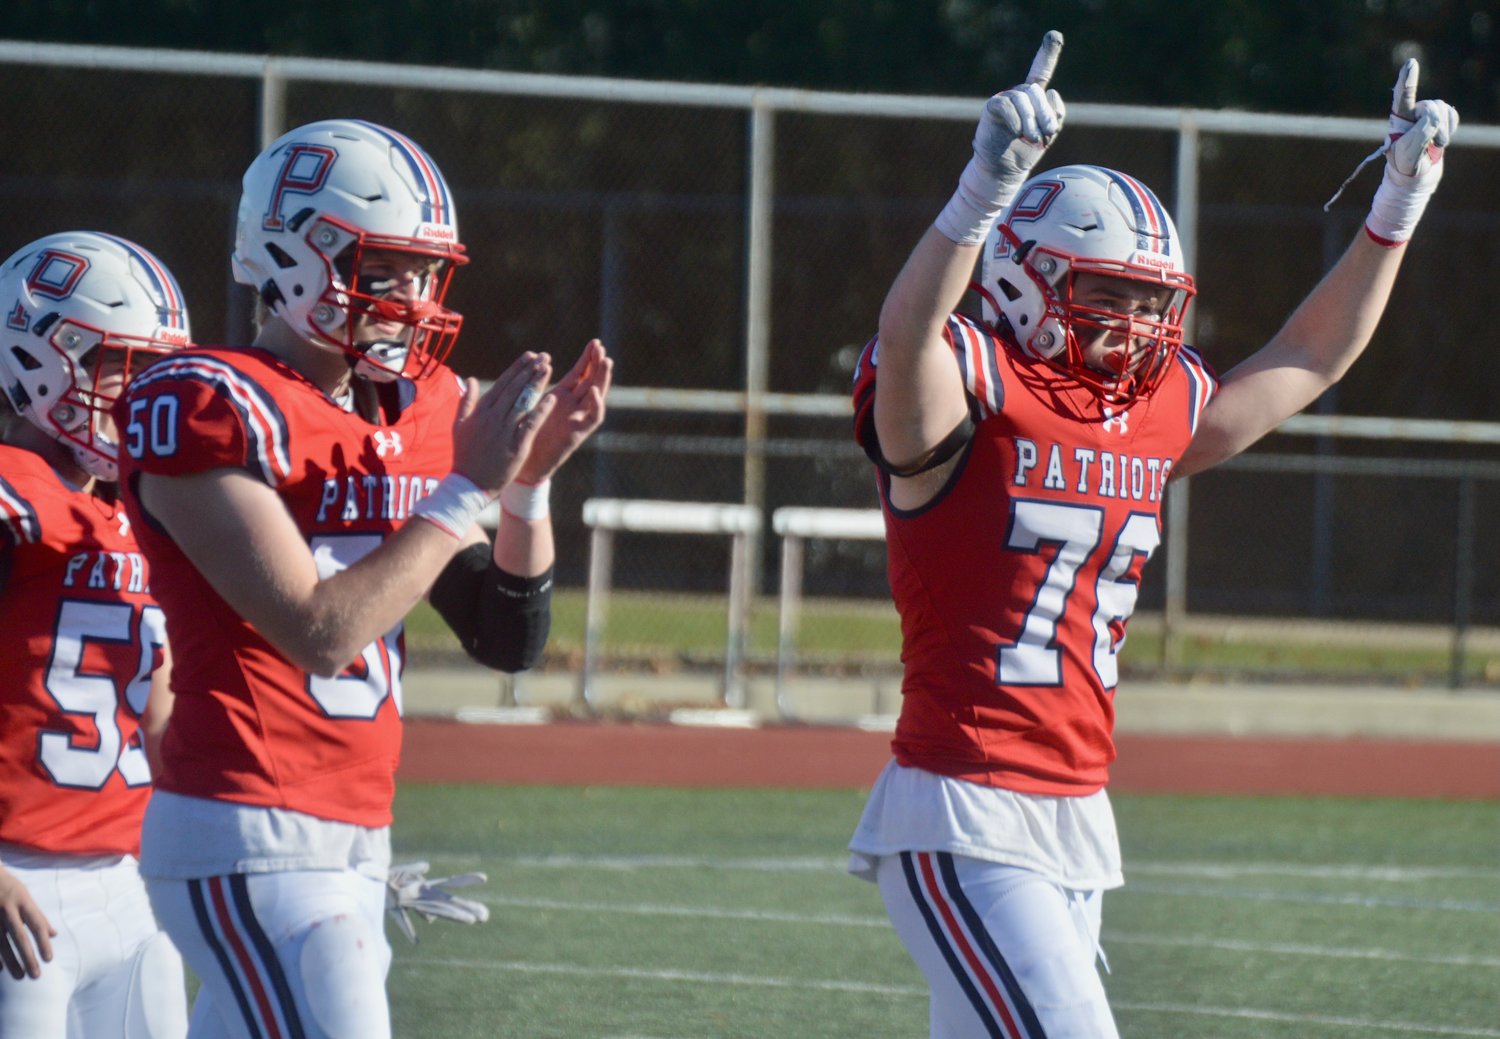 Parker Daigle (right) celebrates the Patriots’ win after the final whistle.